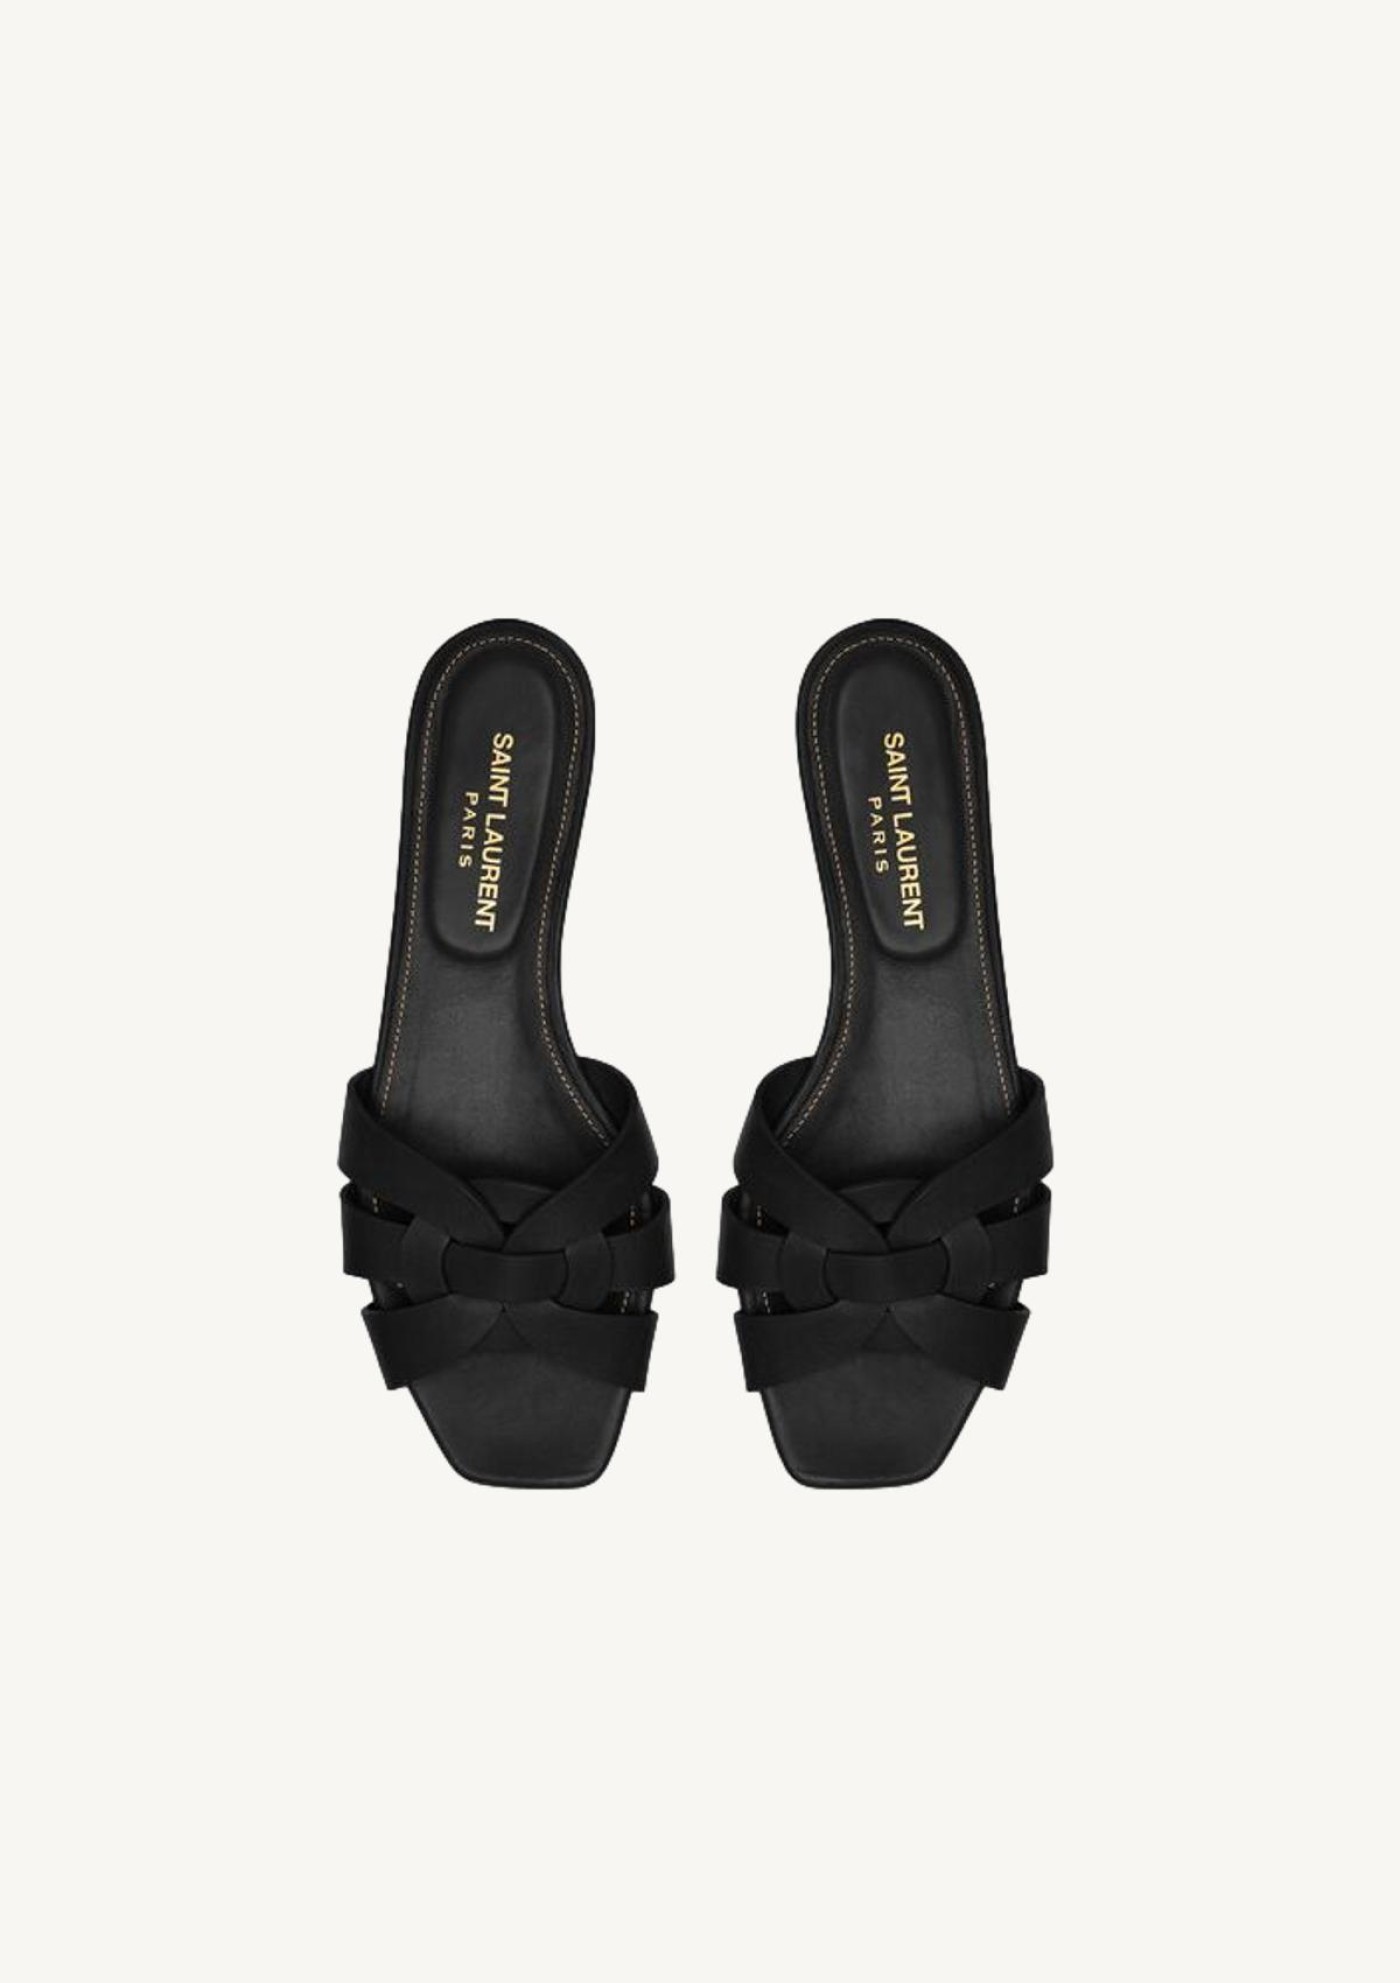 Tribute black smooth leather mules